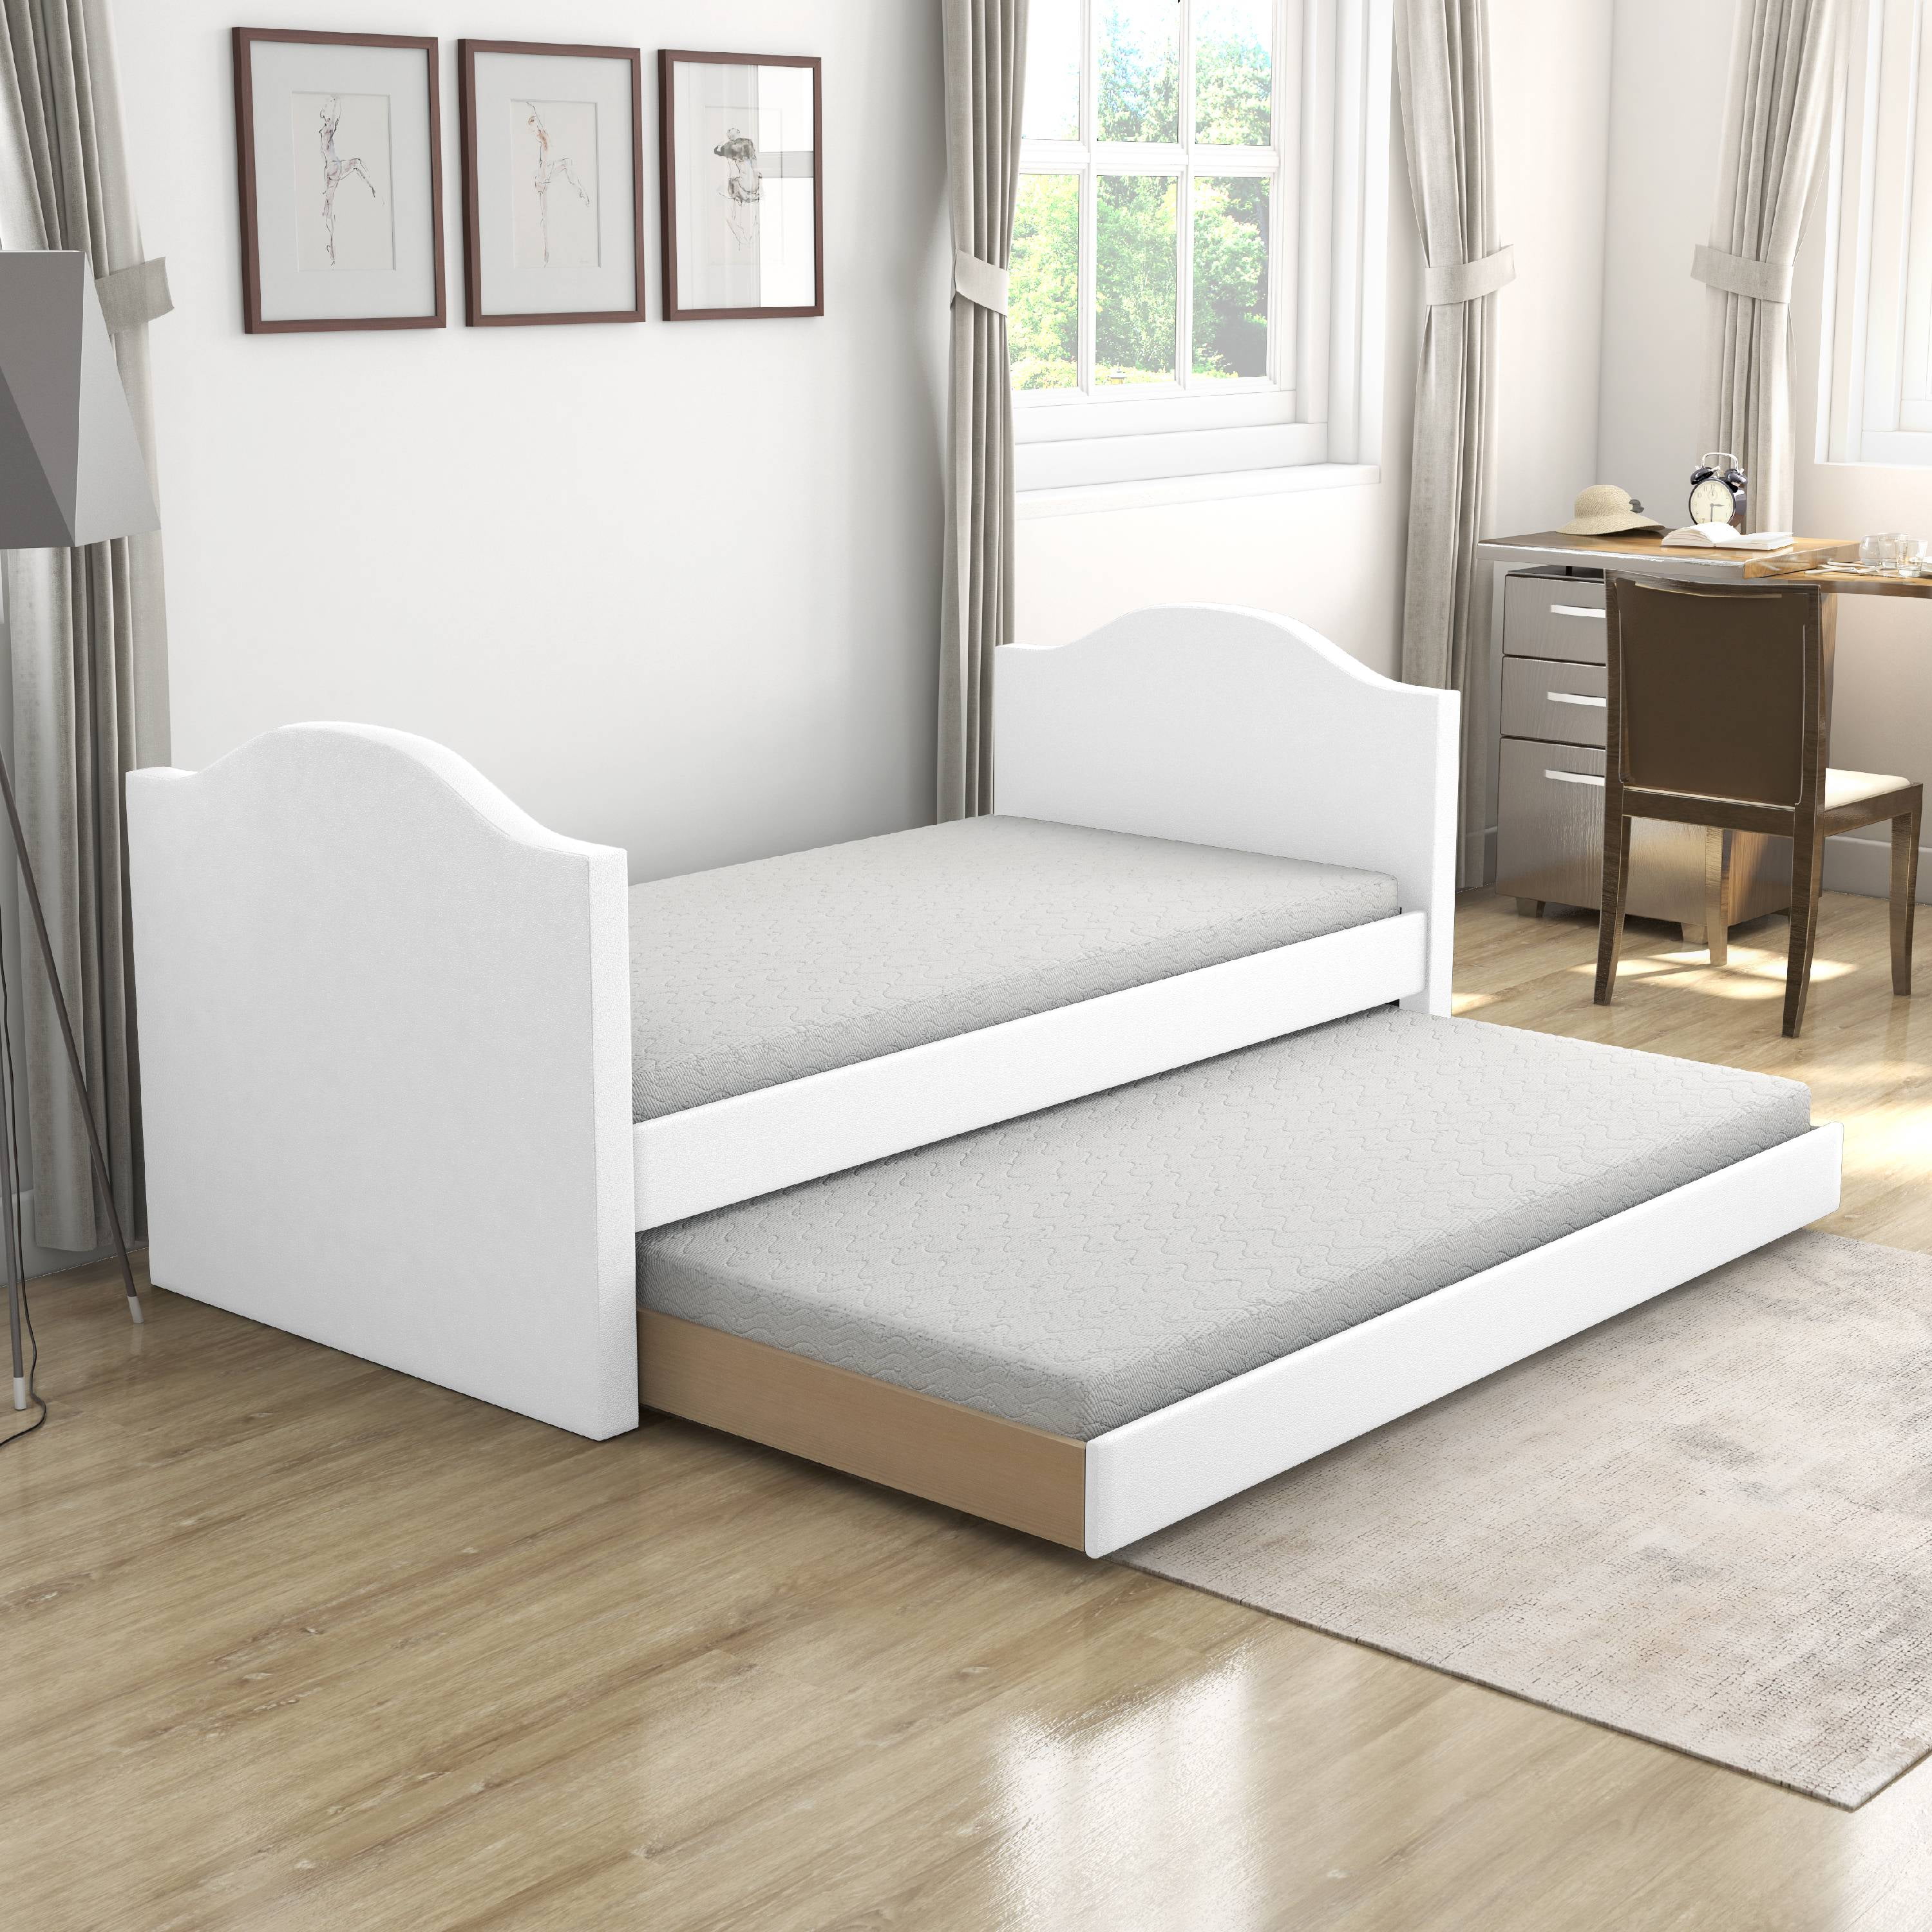 Premier Melissa White Upholstered Faux, Leather Trundle Bed